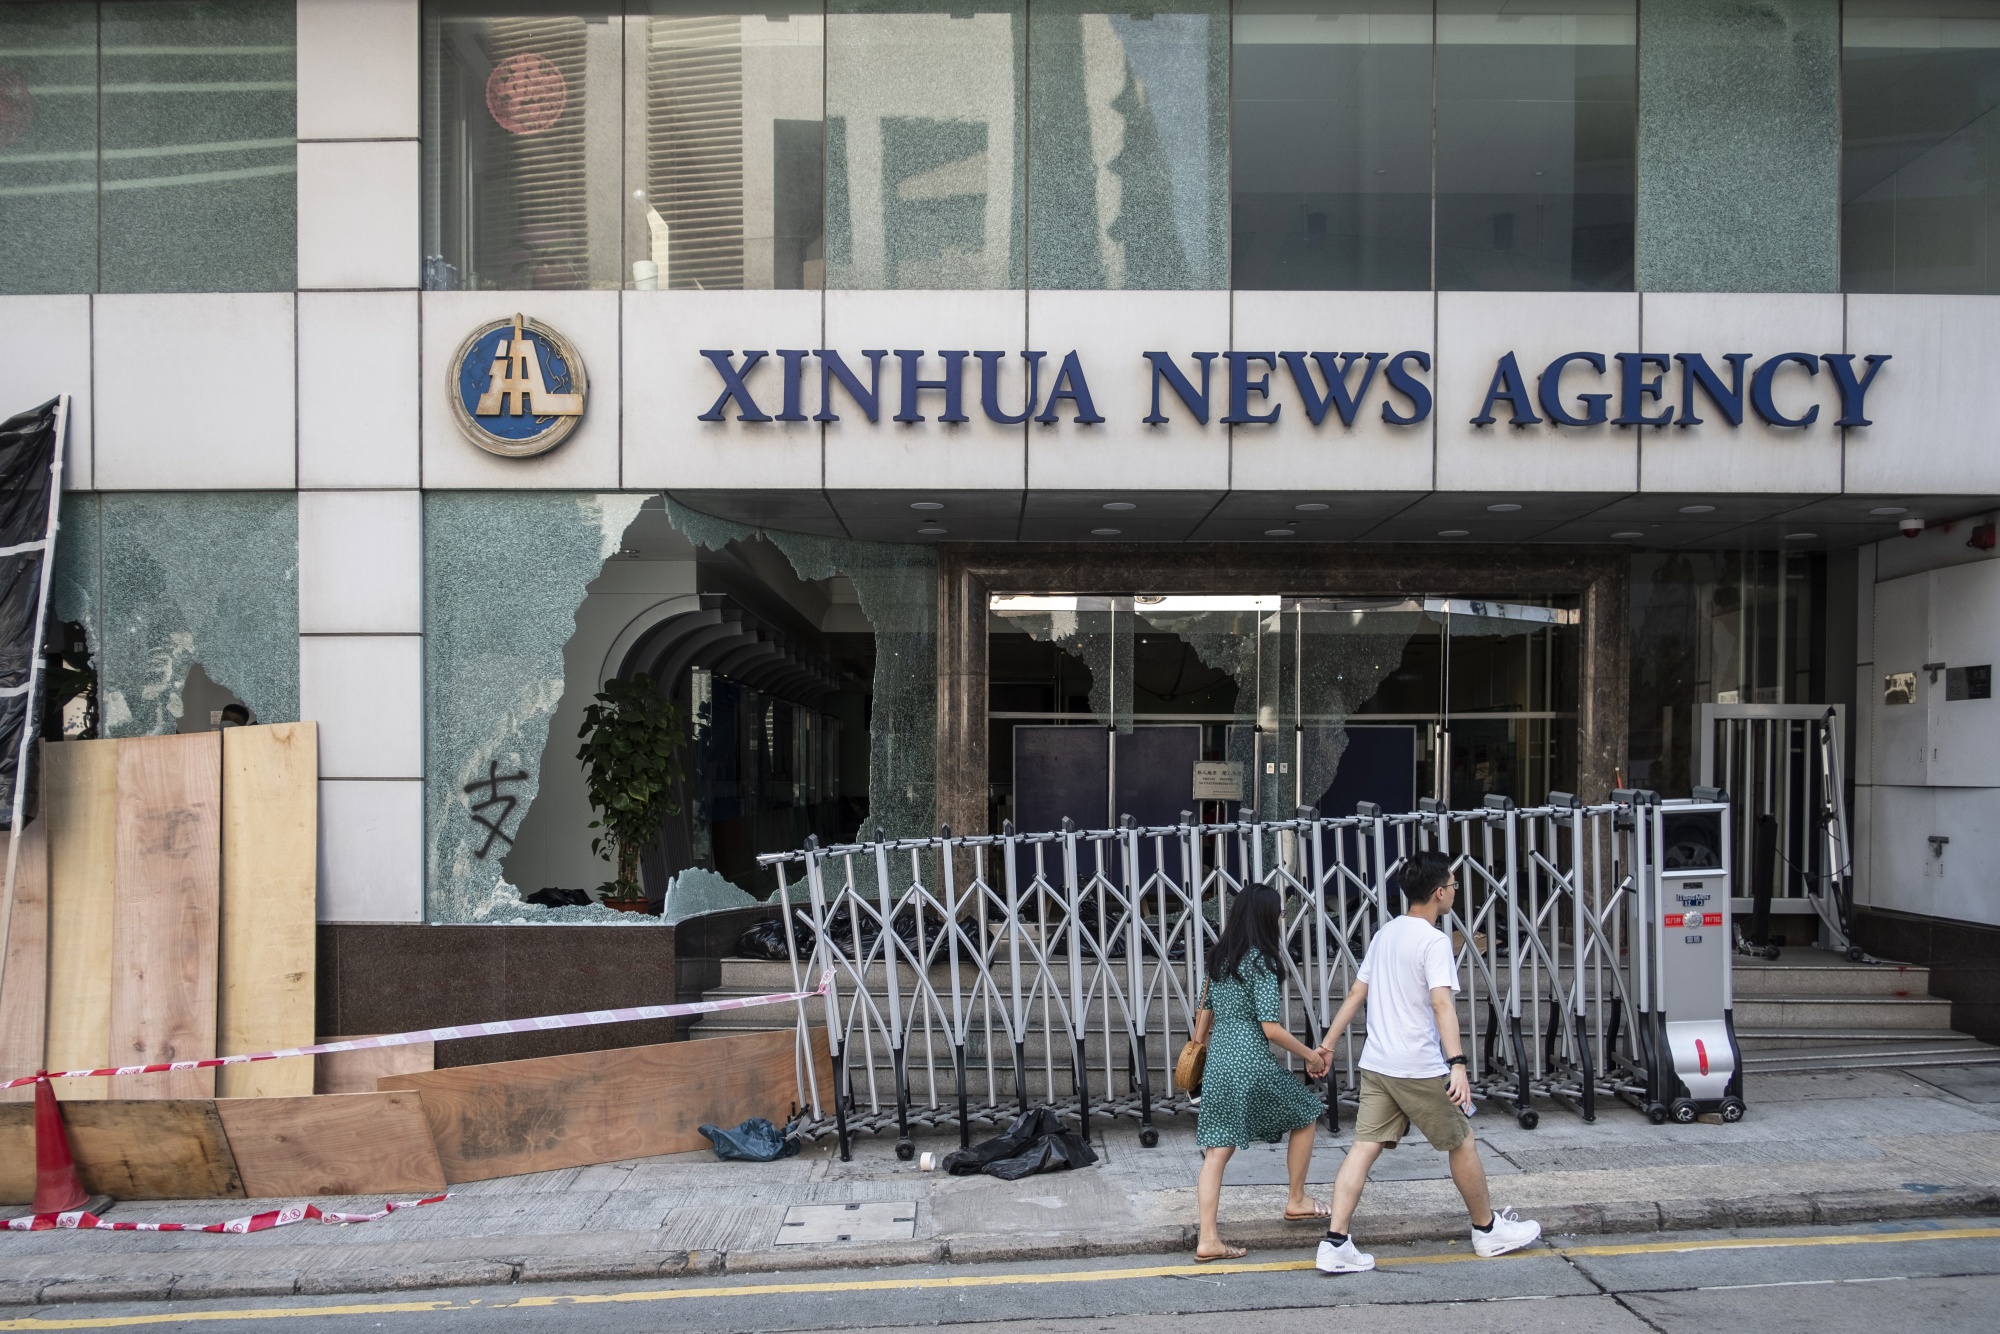 Pedestrians walk past a vandalized entrance to the offices of Xinhua News Agency following a protest in Hong Kong, China, on&nbsp;Nov. 3, 2019.&nbsp;